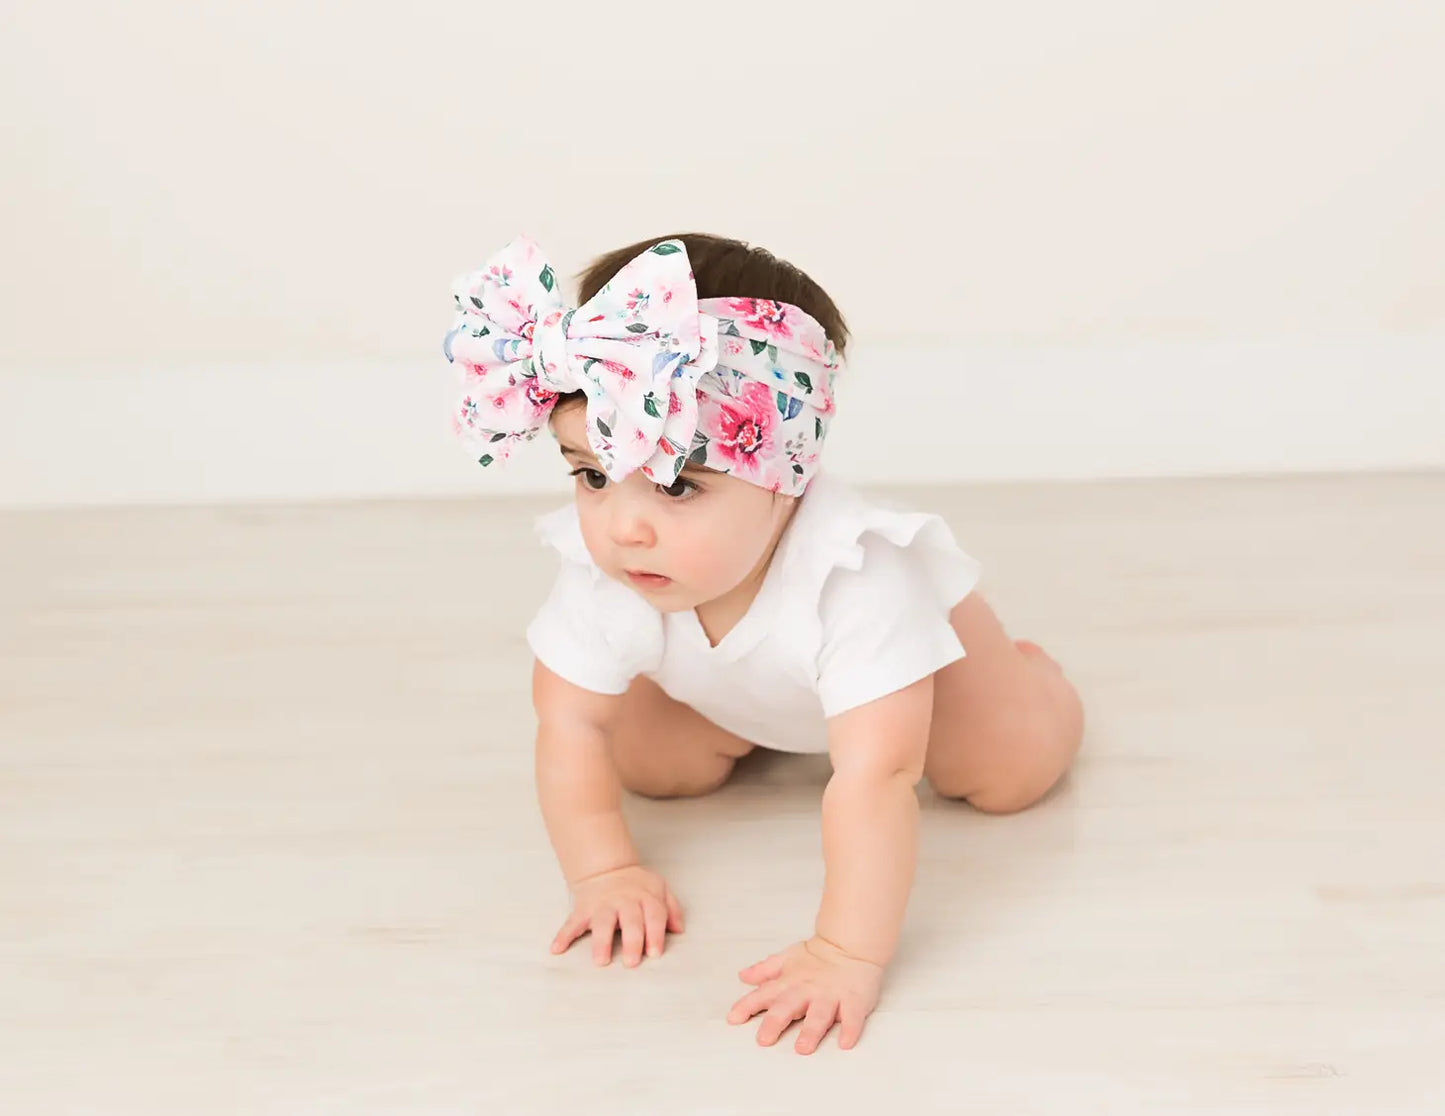 Picture of a white baby with brown hair in a white ruffle onesie crawling wearing a big bow headband that is white with pink flowers and has blue and green leaves